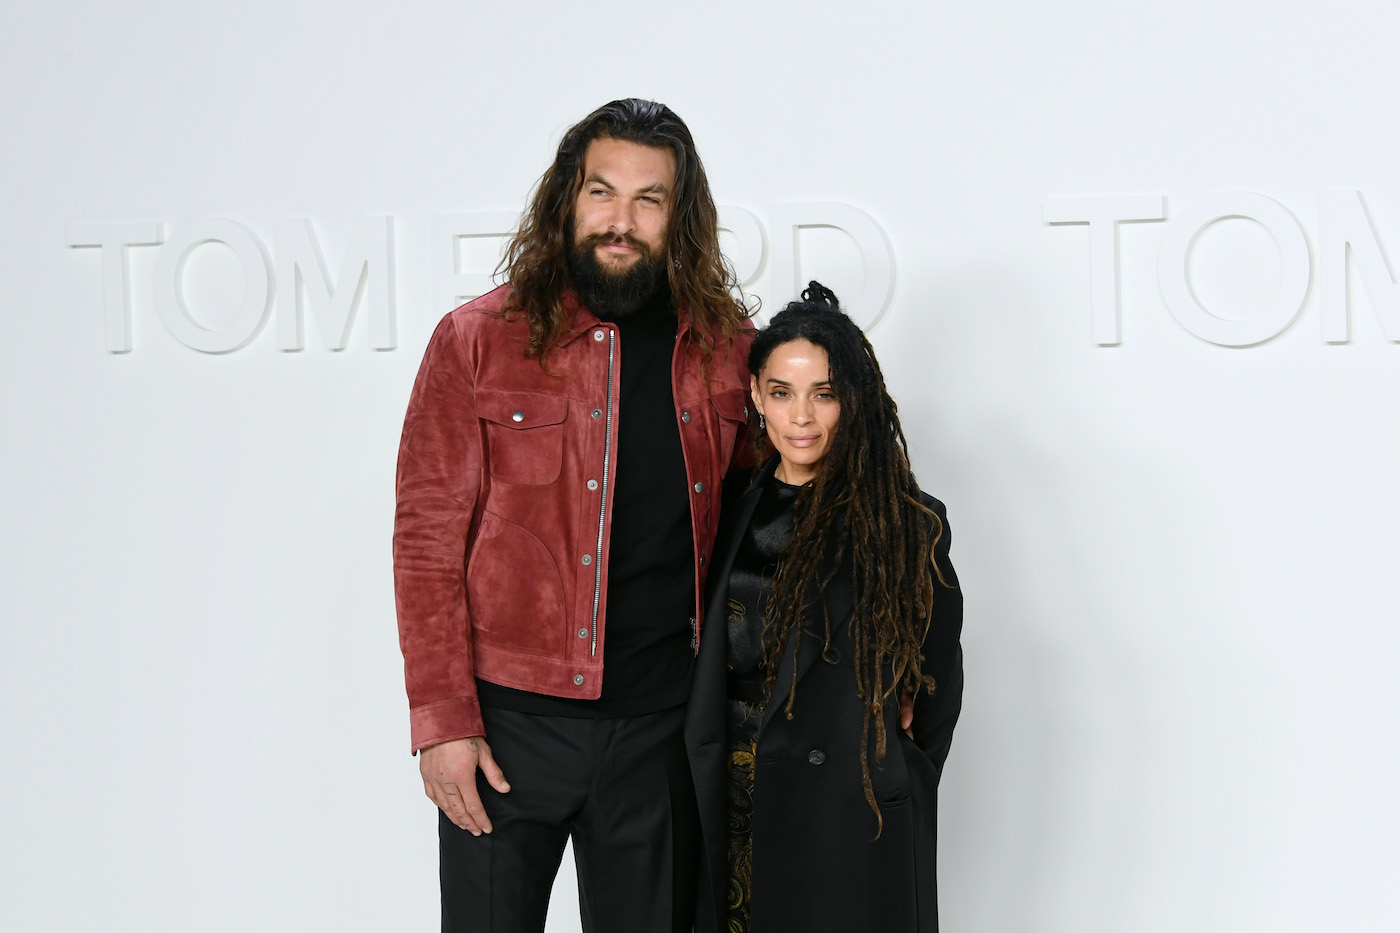 Jason Momoa and Lisa Bonet attended an awards show in 2020